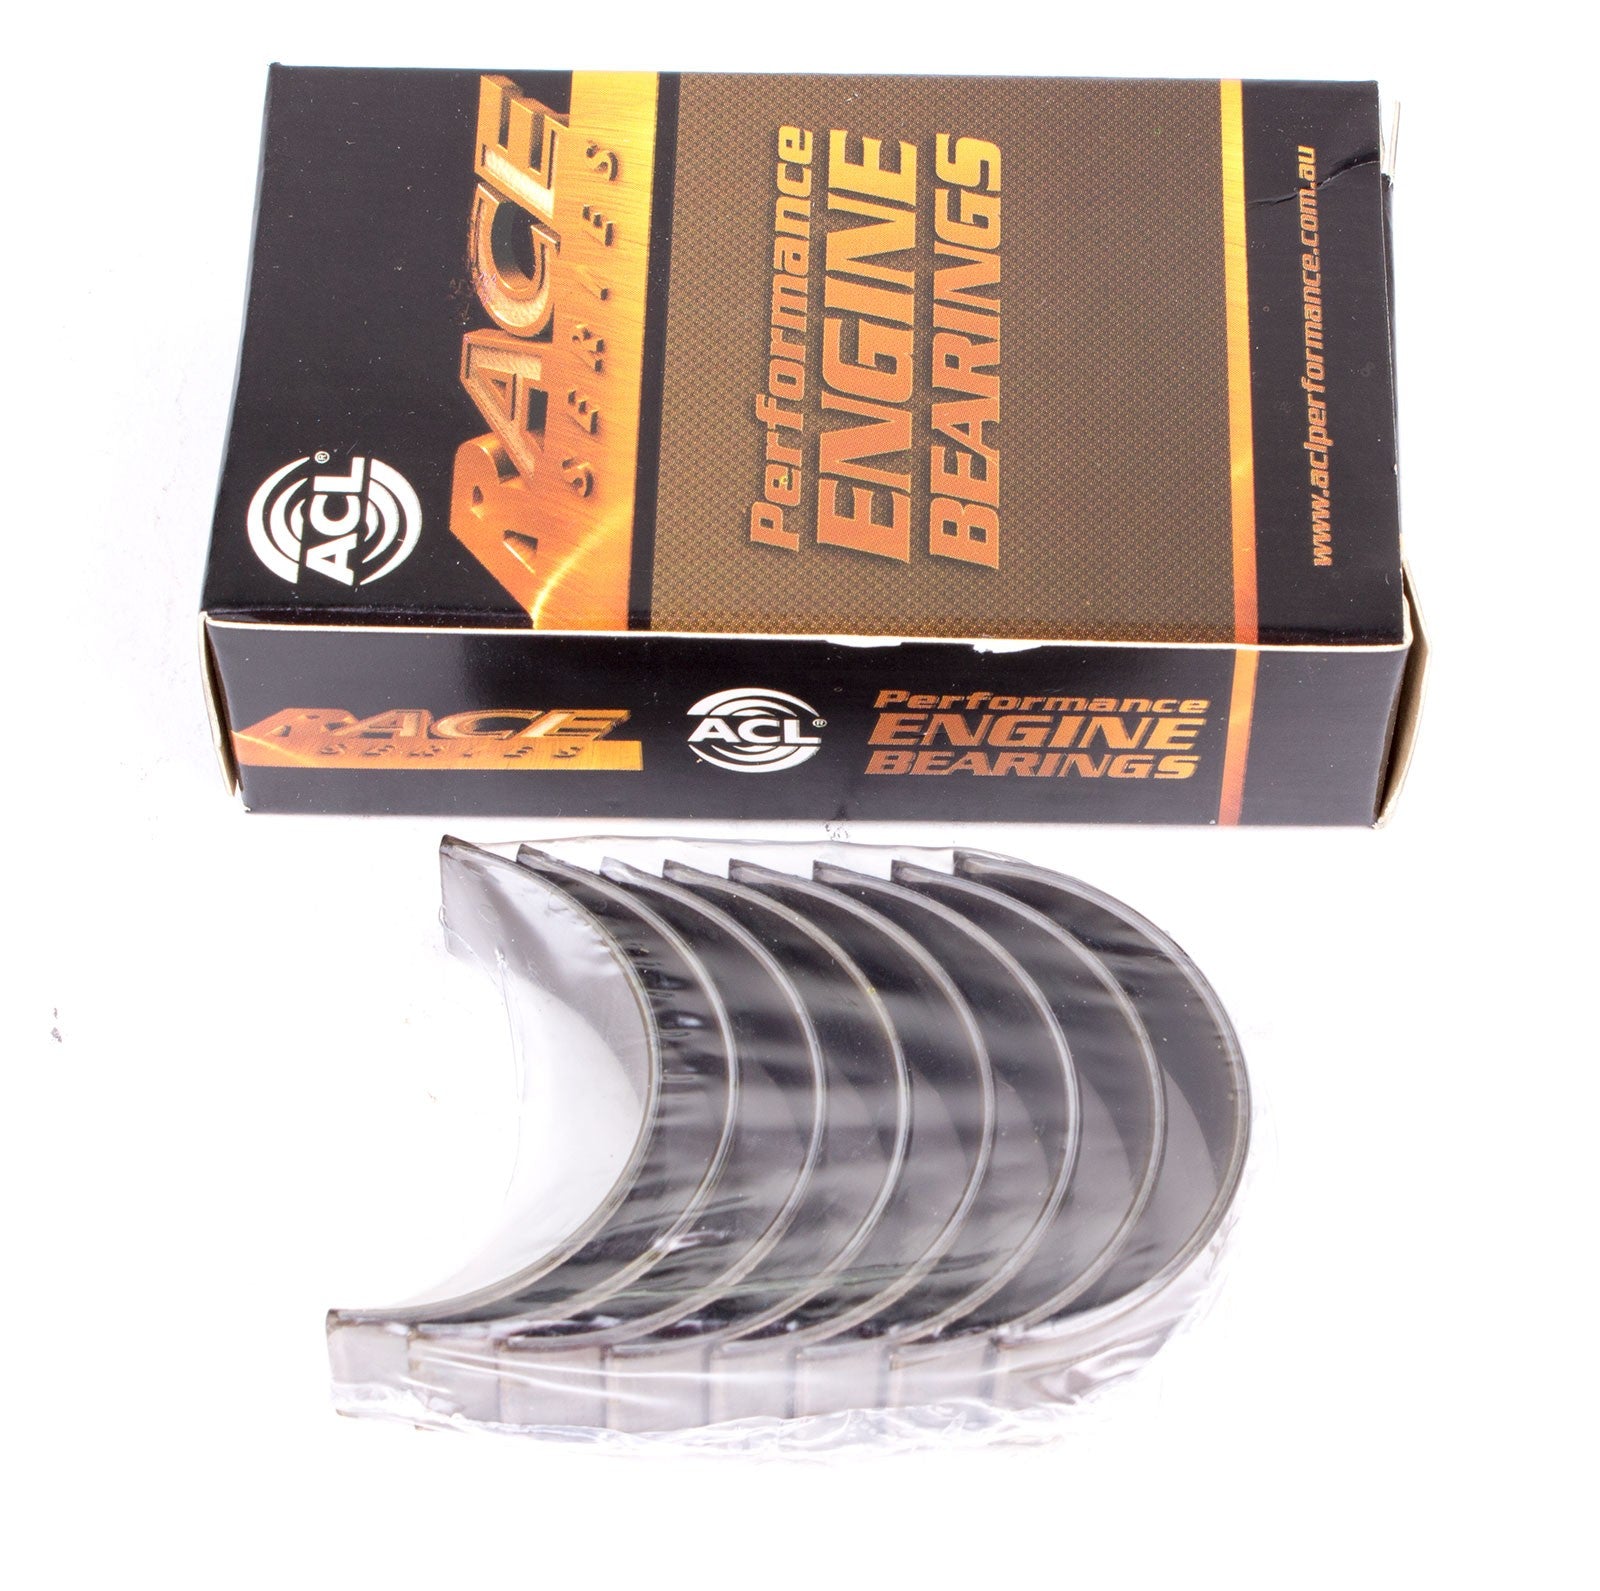 ACL 5M7297H-001 Main bearing set (ACL Race Series) Photo-0 